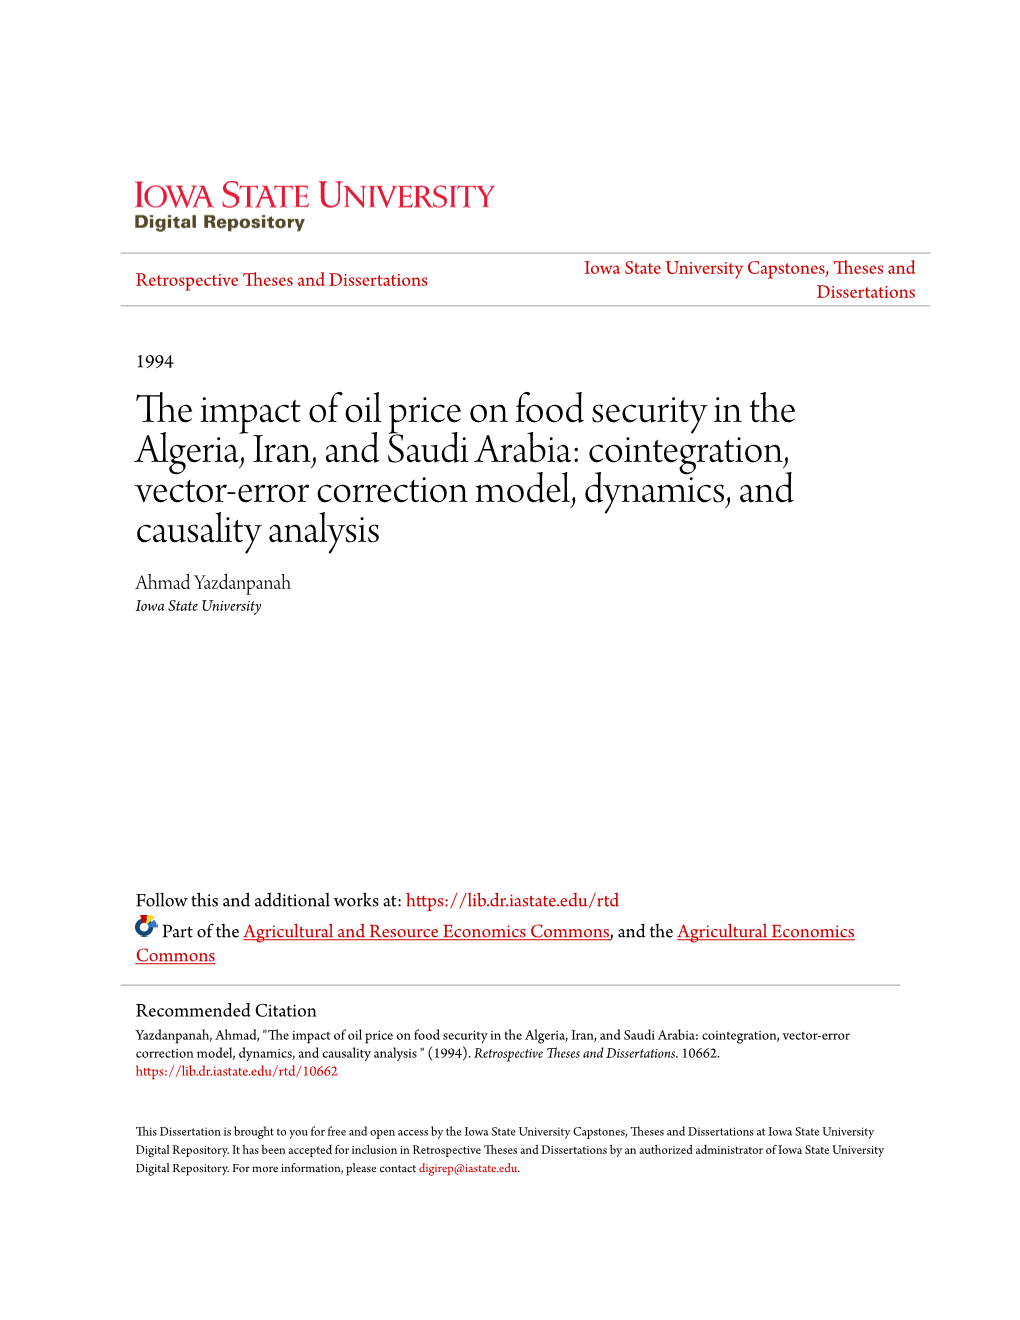 The Impact of Oil Price on Food Security in the Algeria, Iran, and Saudi Arabia